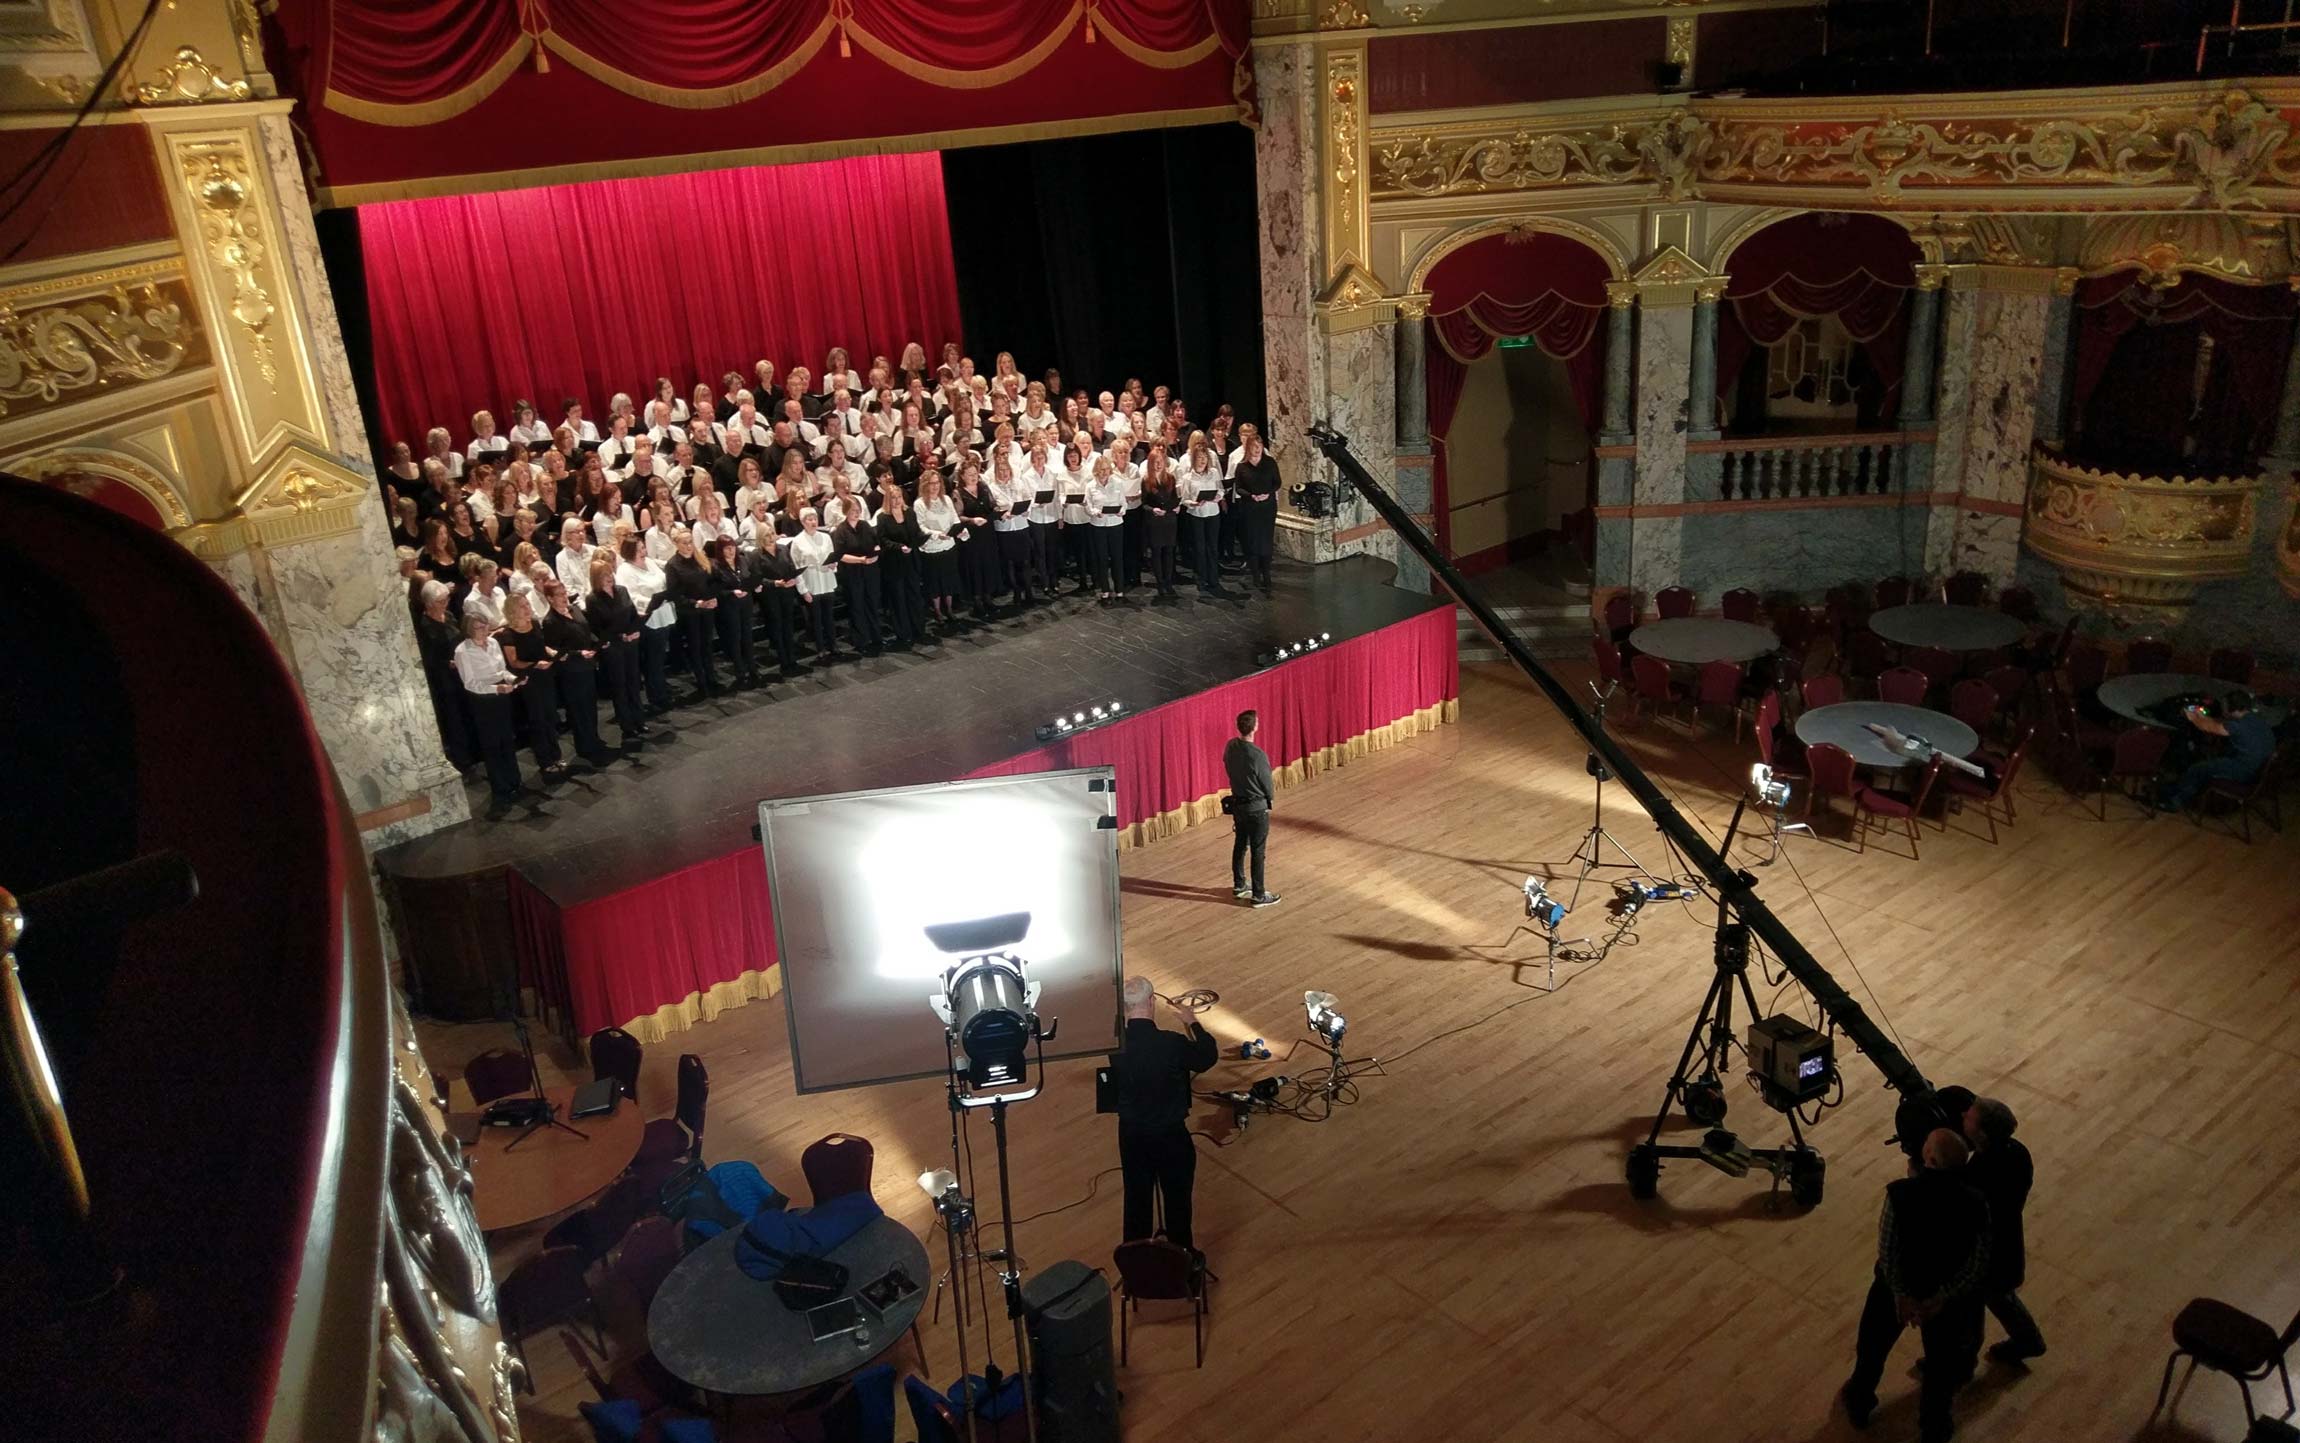 Singers from around Harrogate will play a starring role in this year's festive advert for Toys R Us, filmed at the Royal Hall